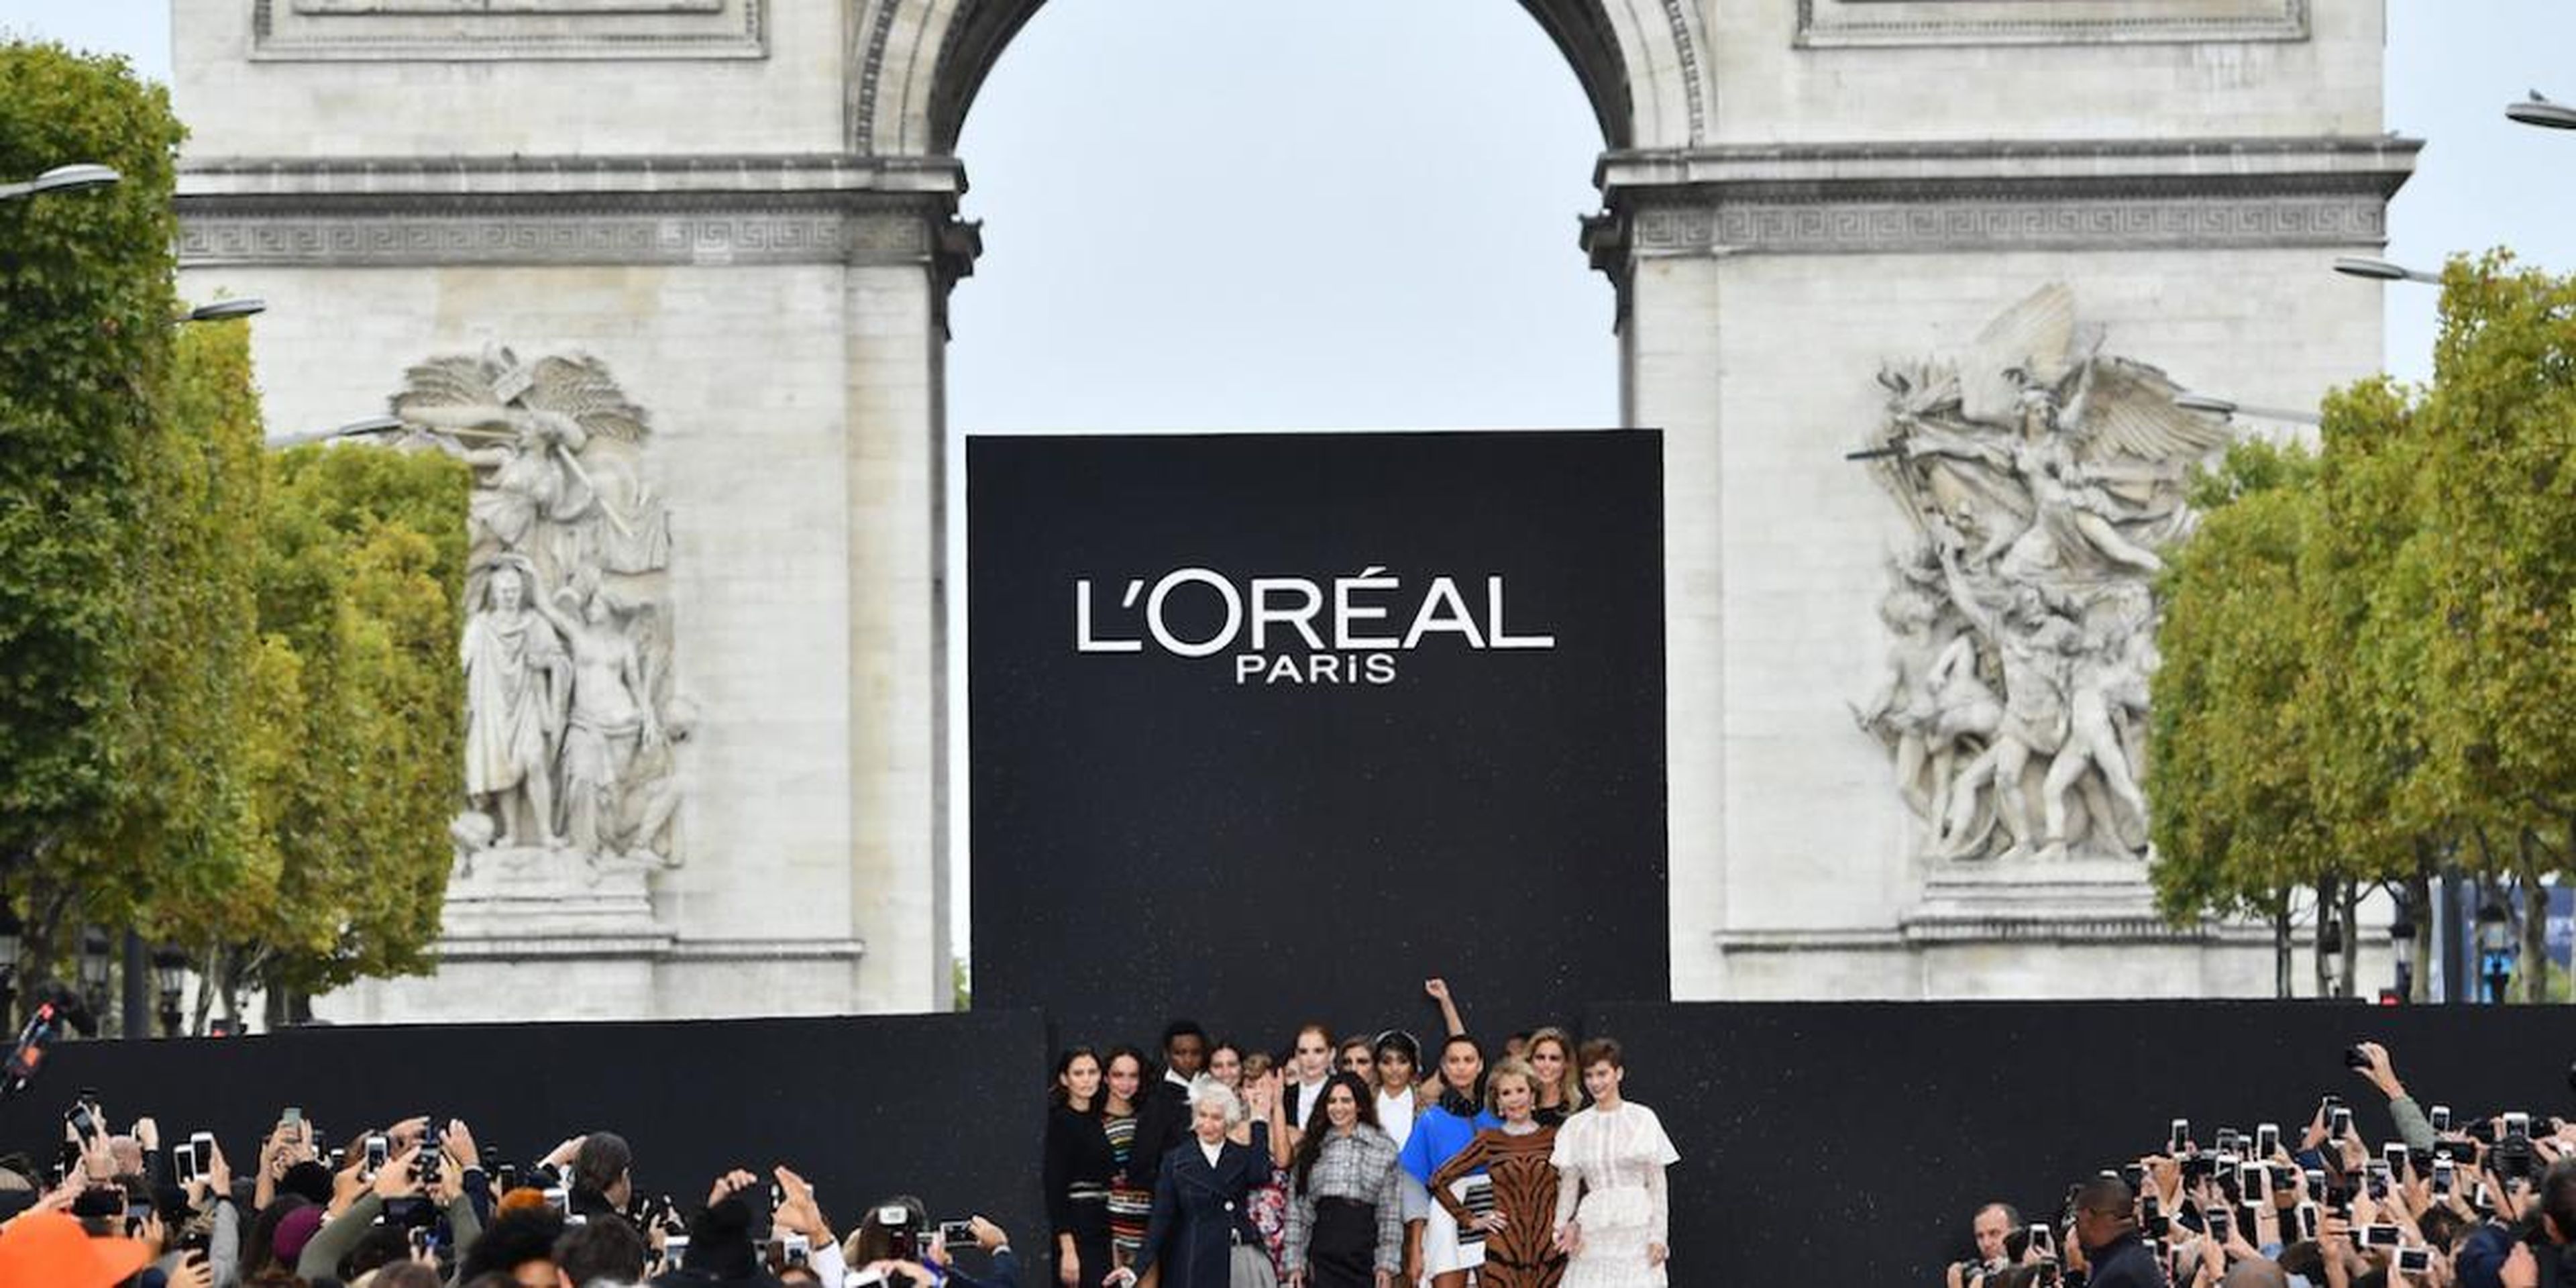 Smog, selfies, and city living are fueling demand for cosmetics, L’Oréal boss says